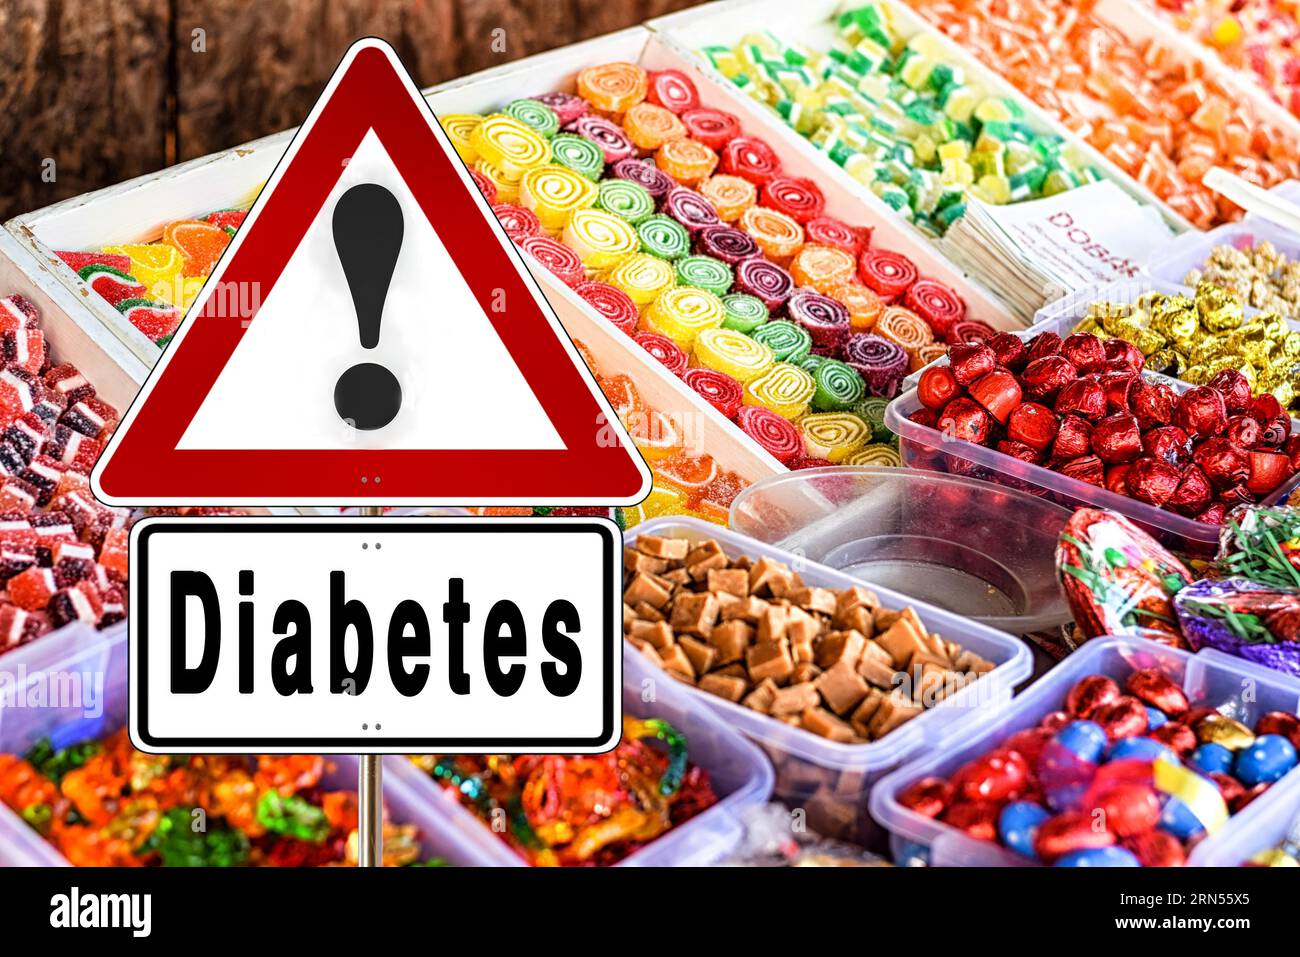 Symbolic image, Attention sign, Caution, Indication of diabetes, Sugar, Sweets, Health risk, Diabetes type 1, Diabetes type 2, Food, Medicine check Stock Photo